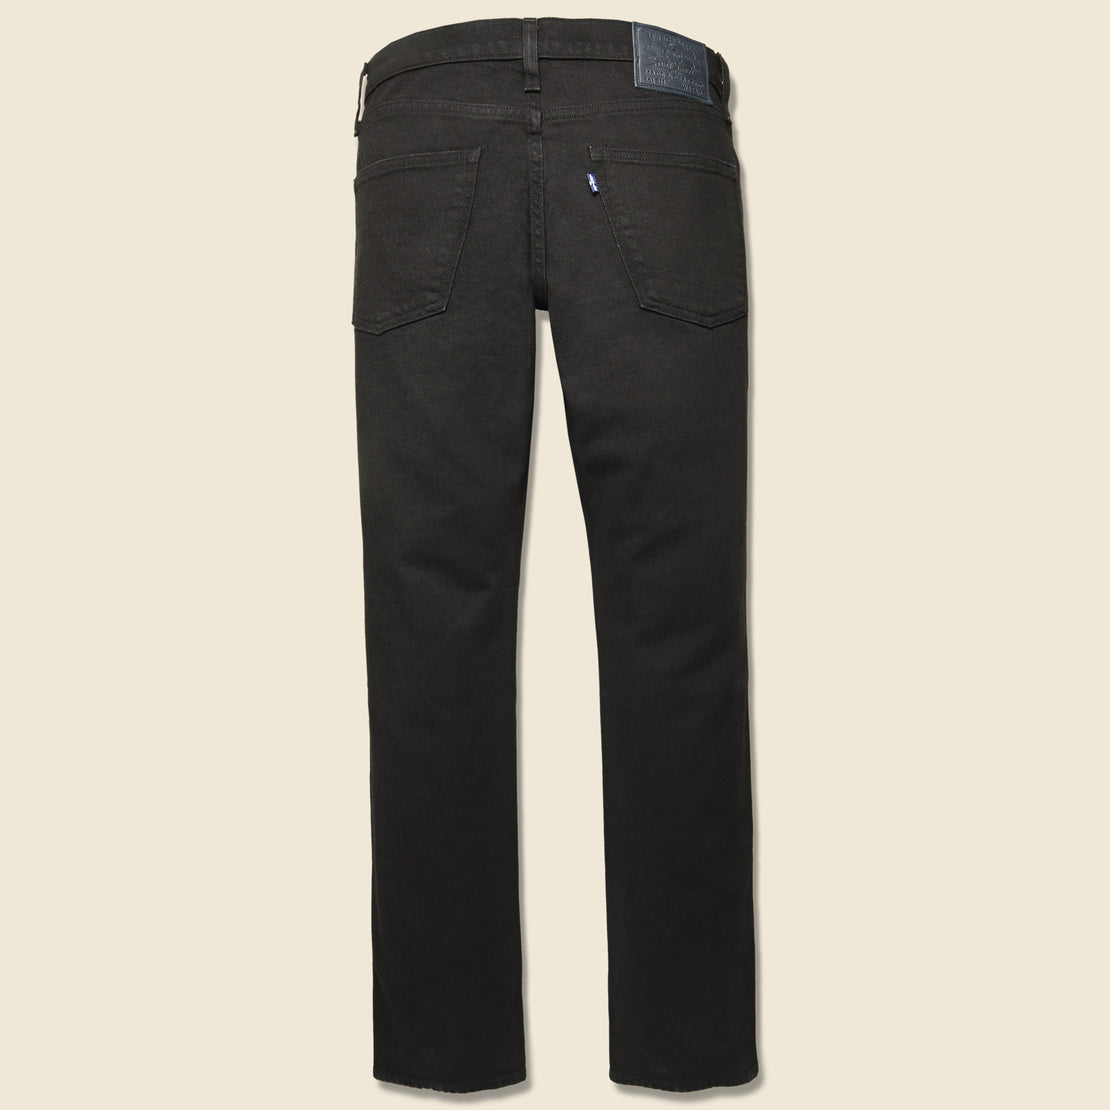 511 Slim Fit Jean - Black Rinse - Levis Made & Crafted - STAG Provisions - Pants - Denim